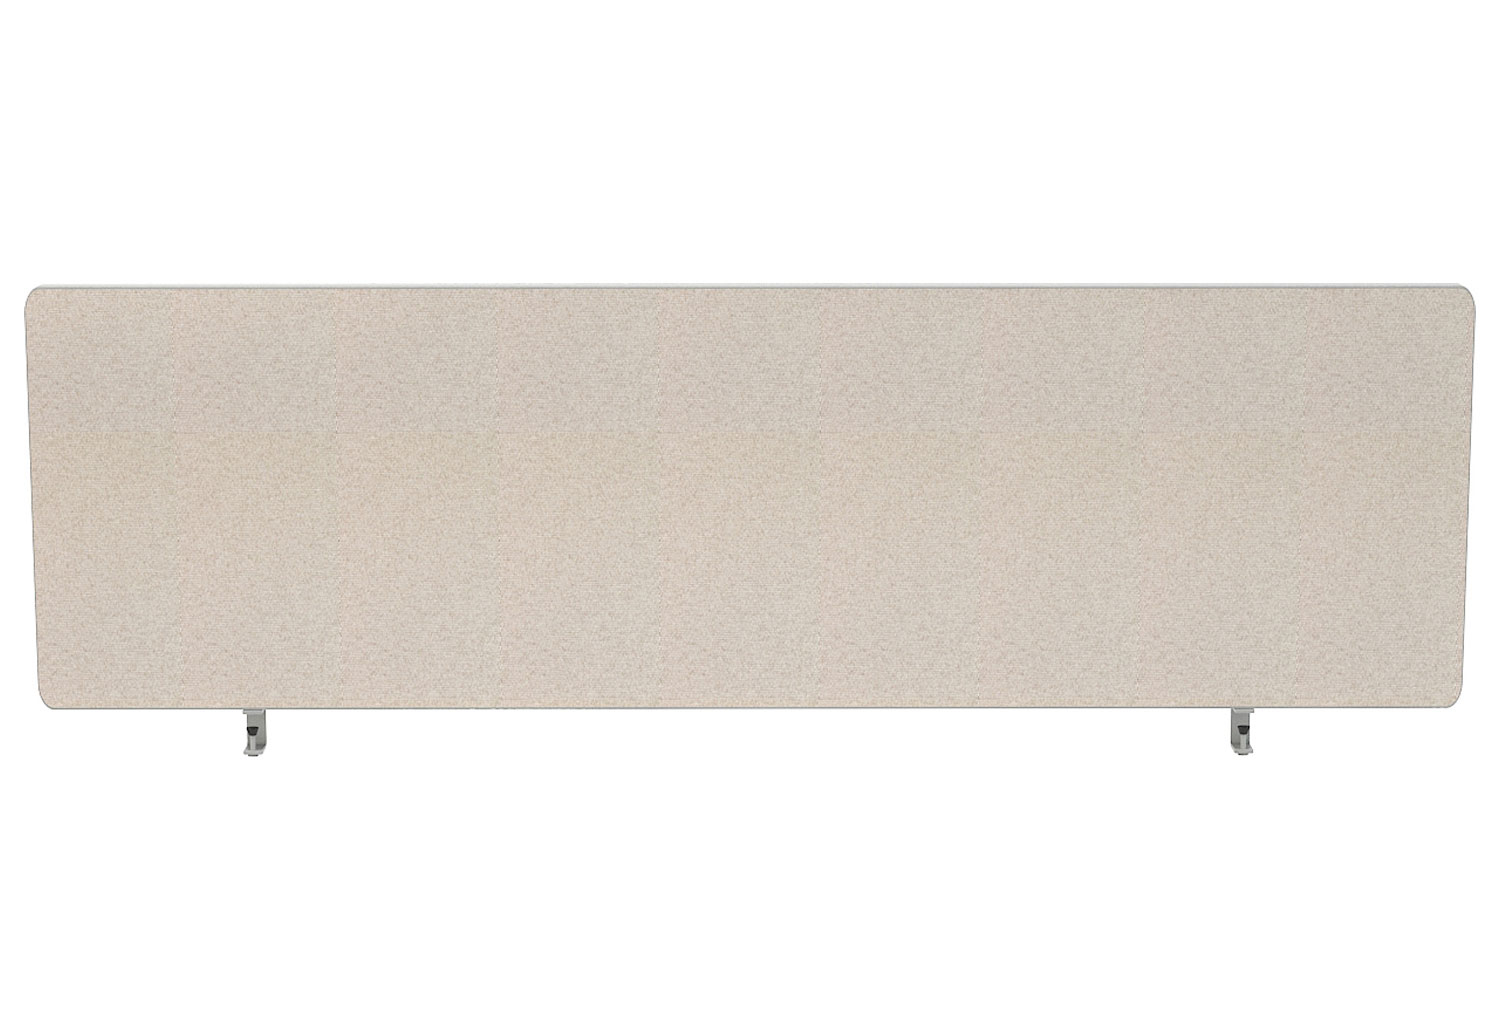 Griffin Rectangular Desktop Office Screens With Rounded Corners, 120wx2dx40h (cm), Light Grey